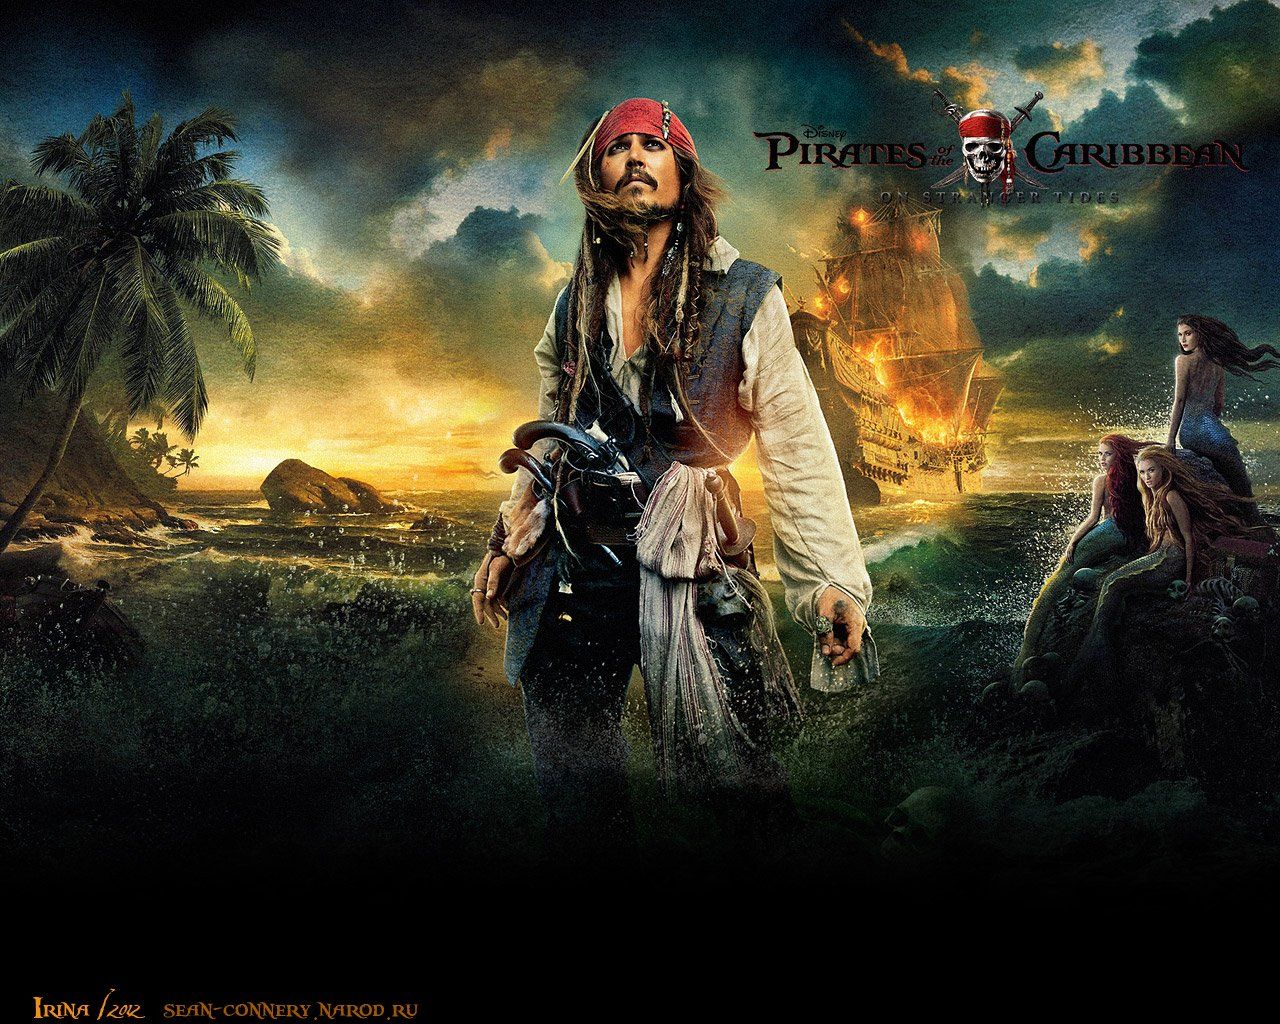 Free download Pirates of the Caribbean image POTC wallpaper HD [1280x1024] for your Desktop, Mobile & Tablet. Explore Pirates Of The Carribean Wallpaper. Caribbean Wallpaper Widescreen, Caribbean Picture Wallpaper